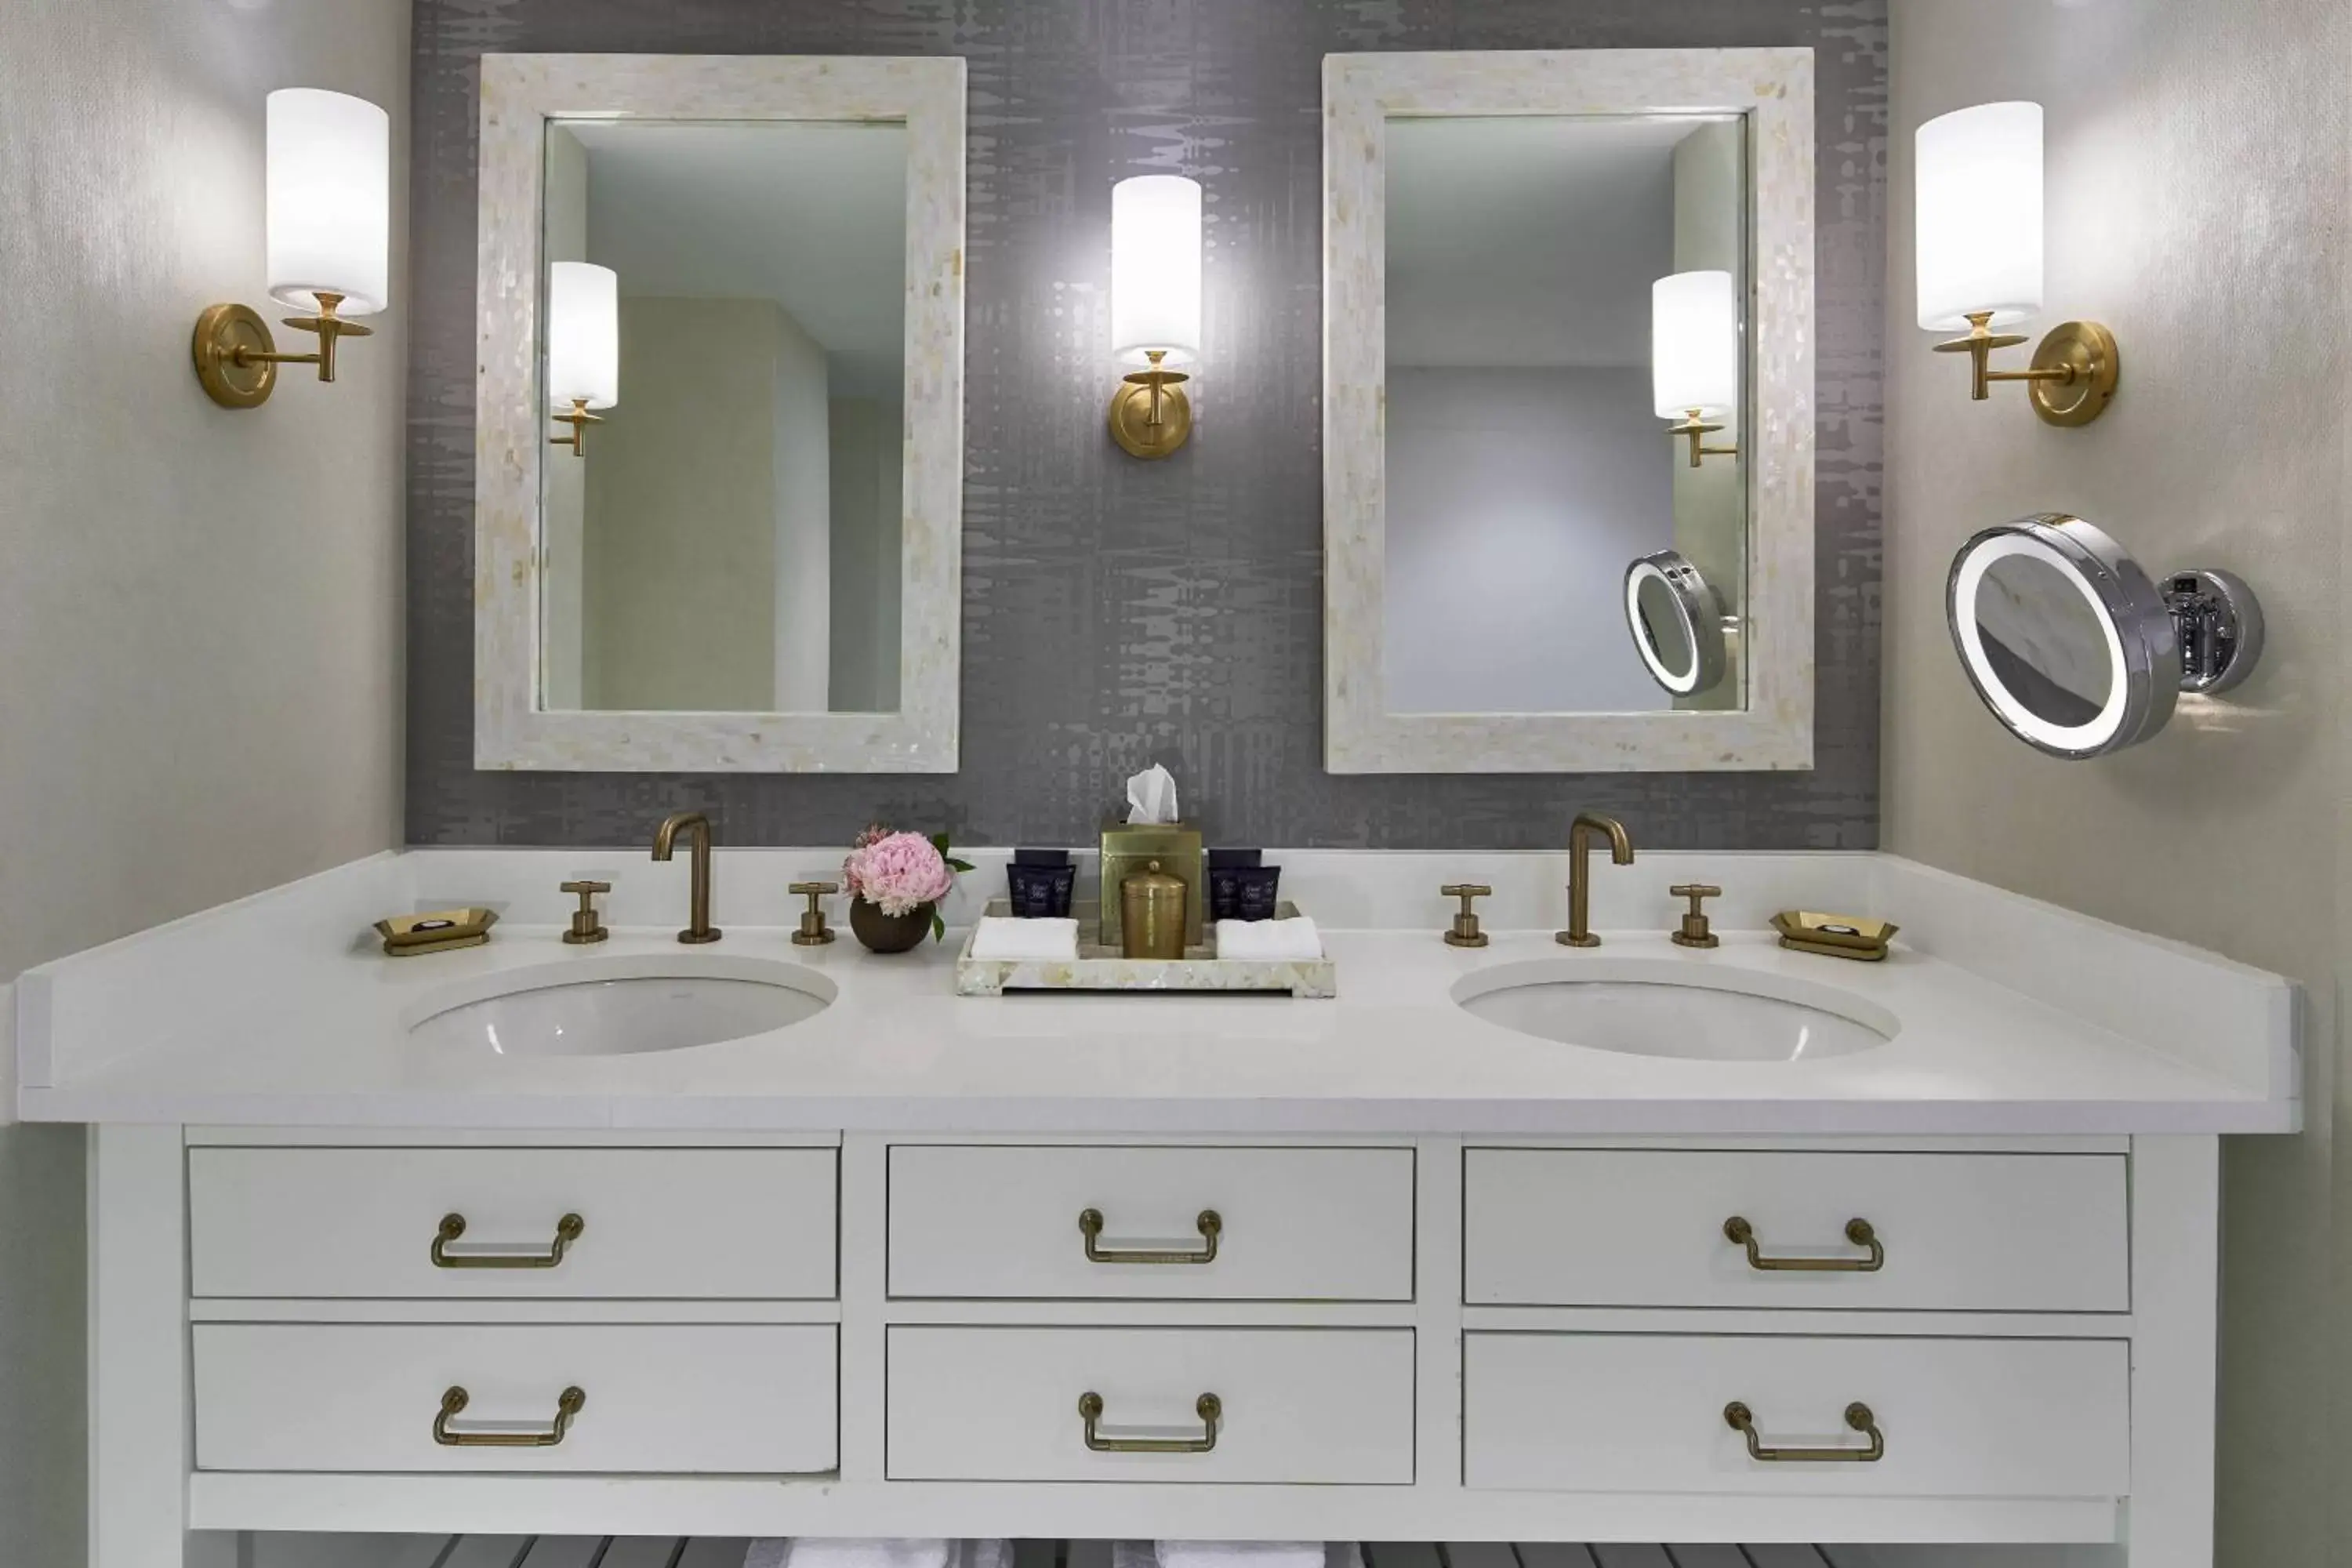 Bathroom in The Grand Hotel Golf Resort & Spa, Autograph Collection